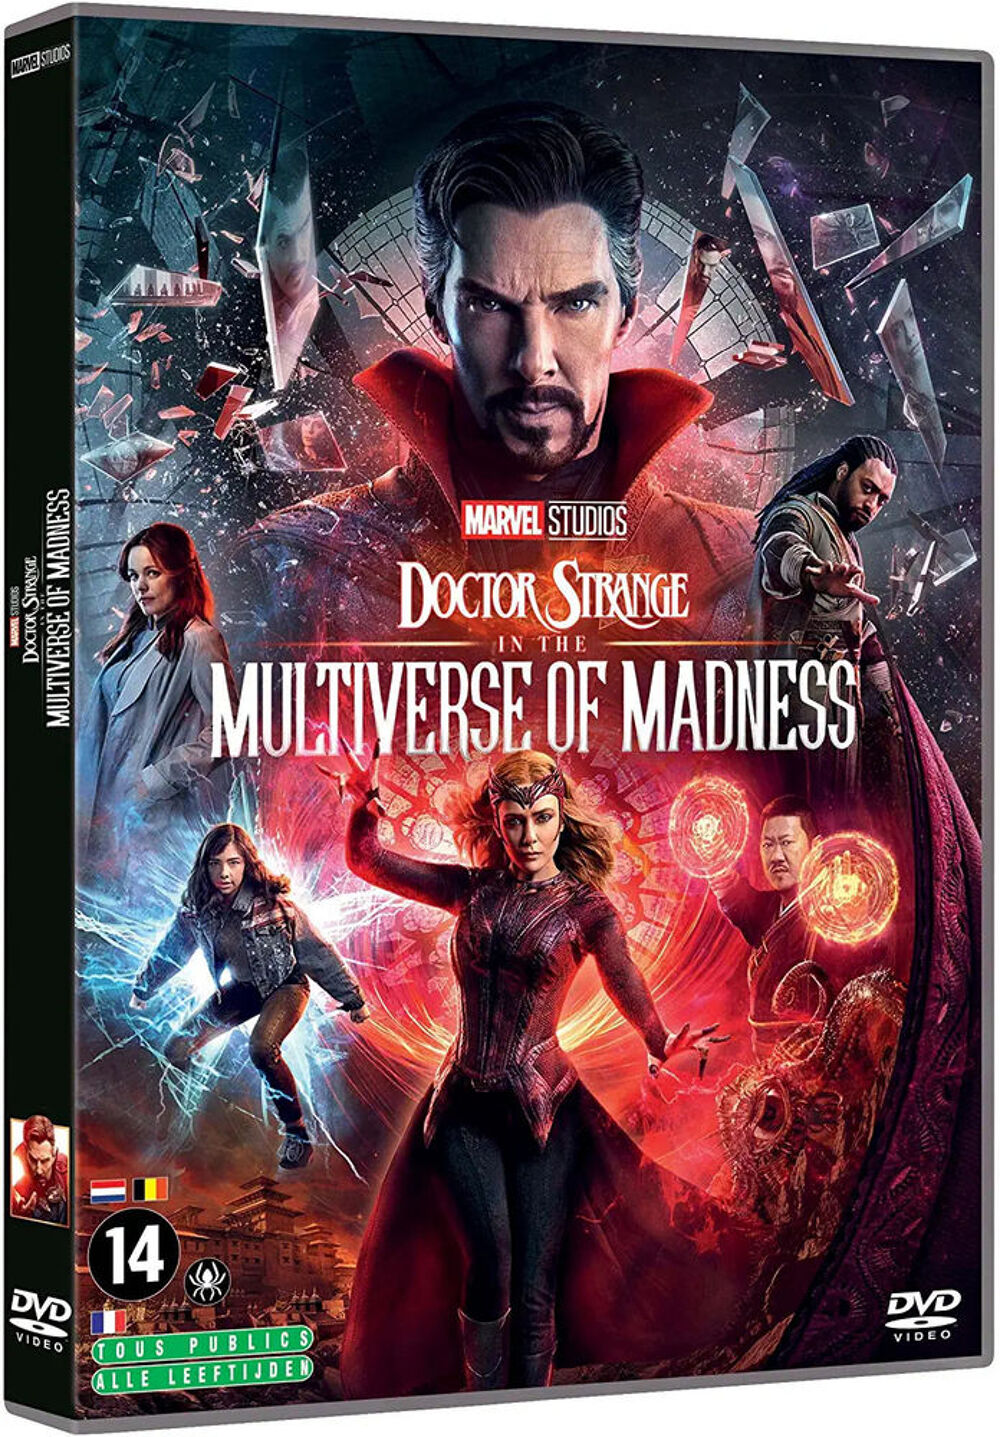 DVD DOCTOR STRANGE IN THE MULTIVERSE OF MADNESS DVD et blu-ray